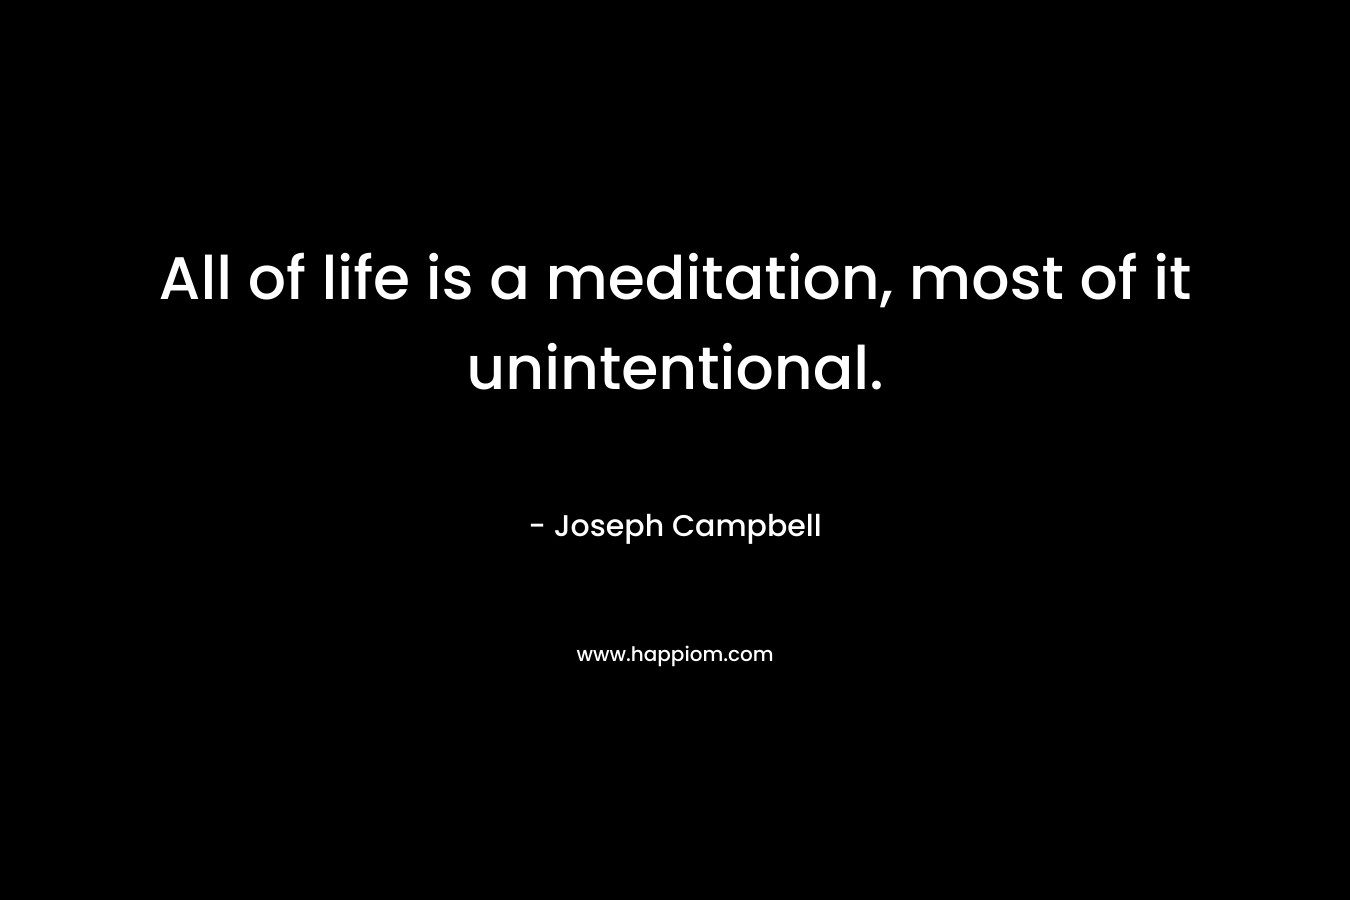 All of life is a meditation, most of it unintentional.